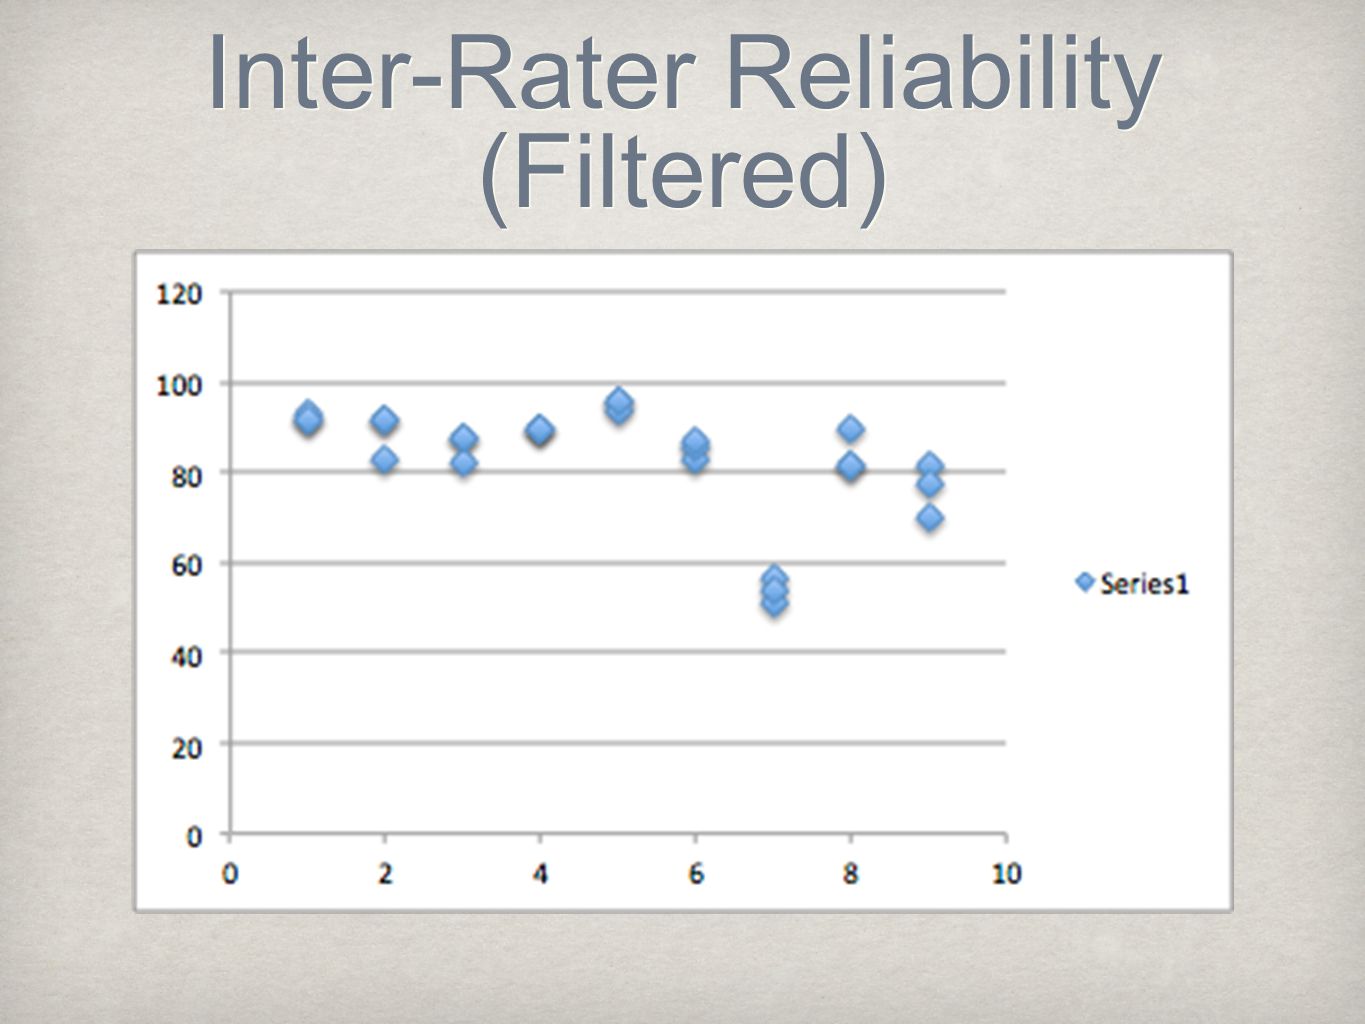 Inter-Rater Reliability (Filtered)